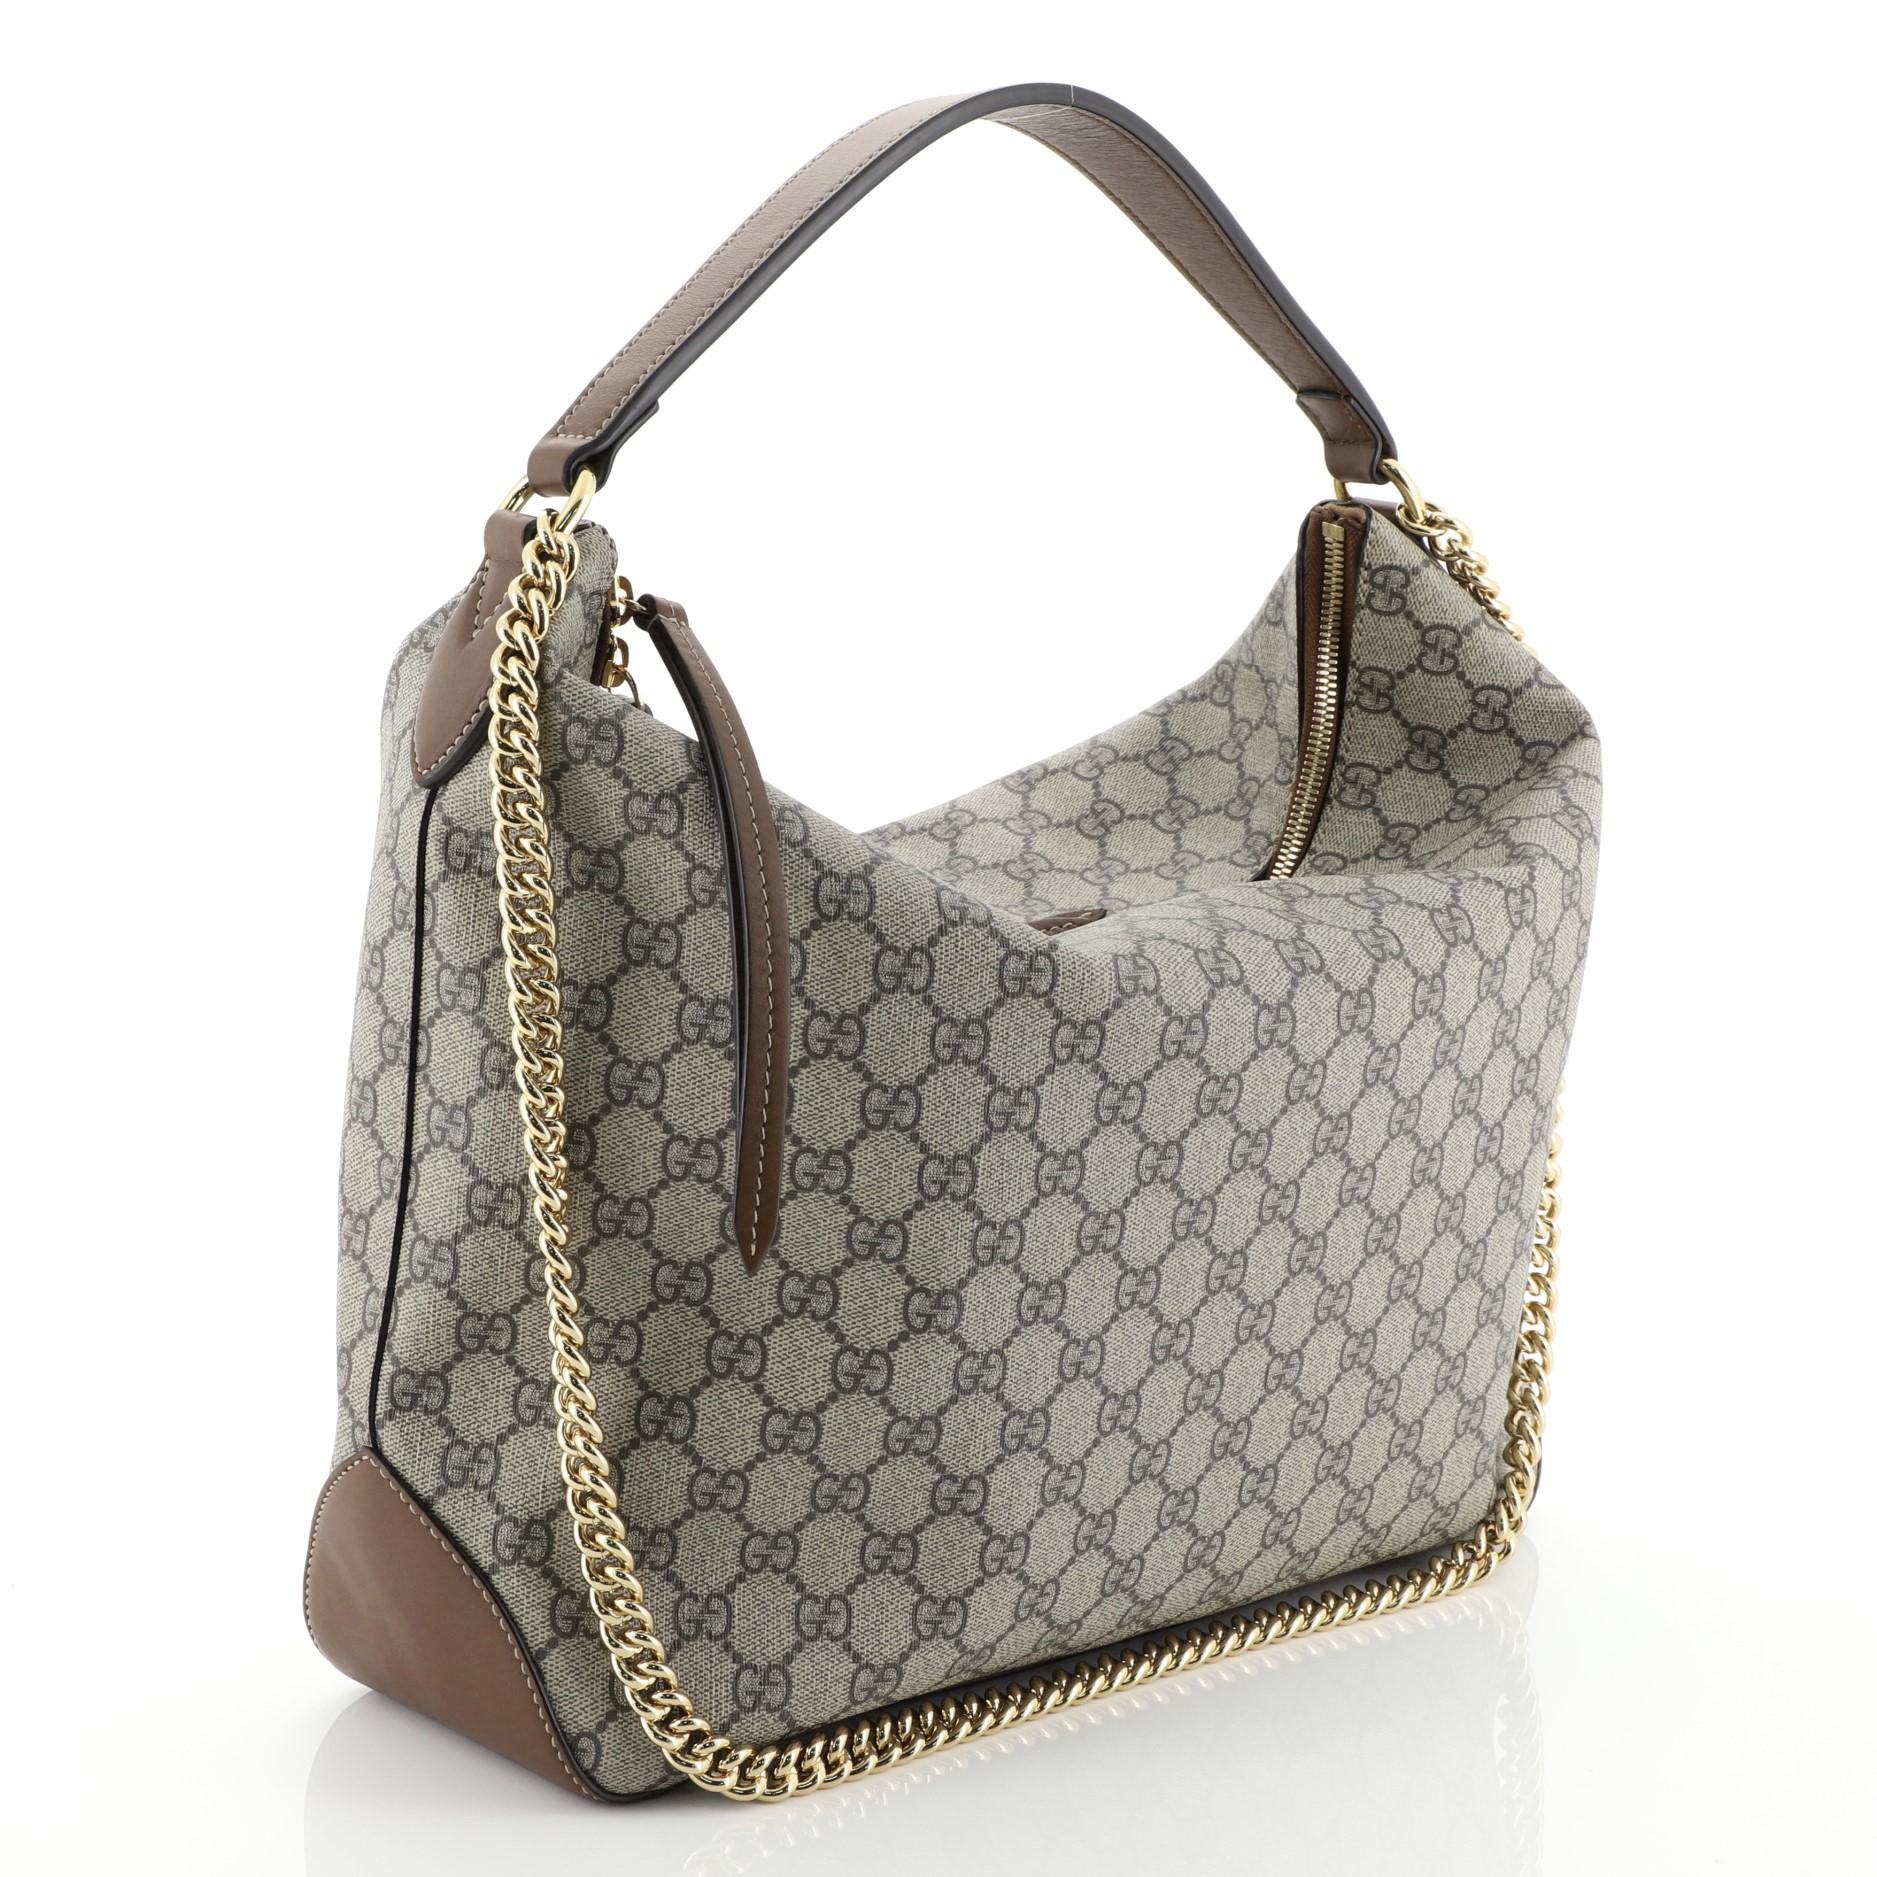 This Gucci Chain Hobo GG Coated Canvas Large, crafted in brown GG coated canvas, features looped leather handle, chain link shoulder strap and gold-tone hardware. Its zip closure opens to a brown microfiber interior with side zip and slip pockets.